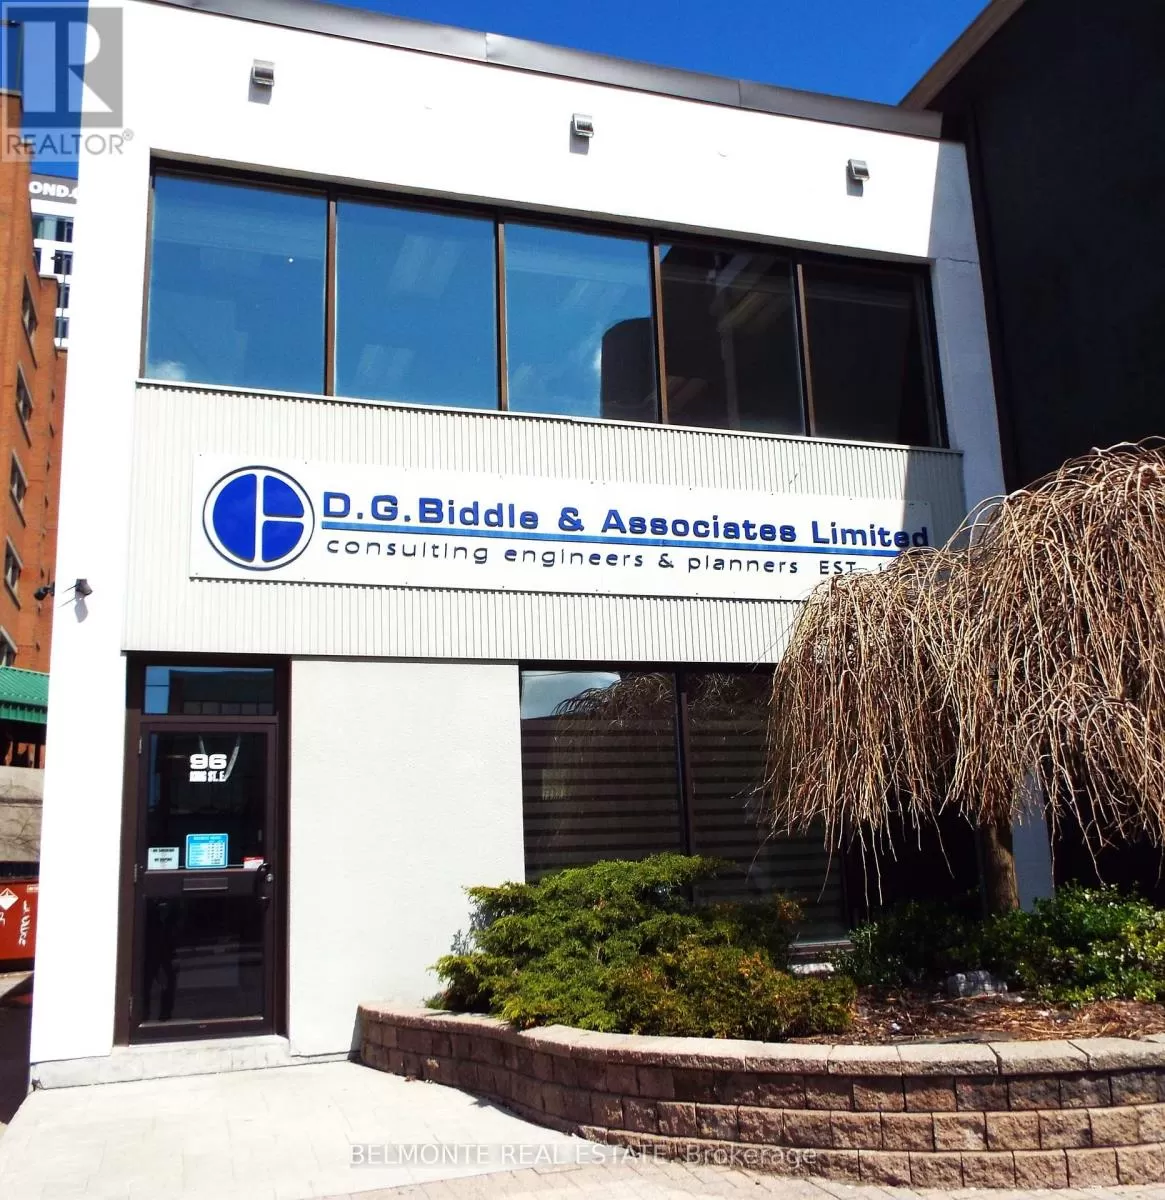 Offices for rent: 96 King St E, Oshawa, Ontario L1H 1B6